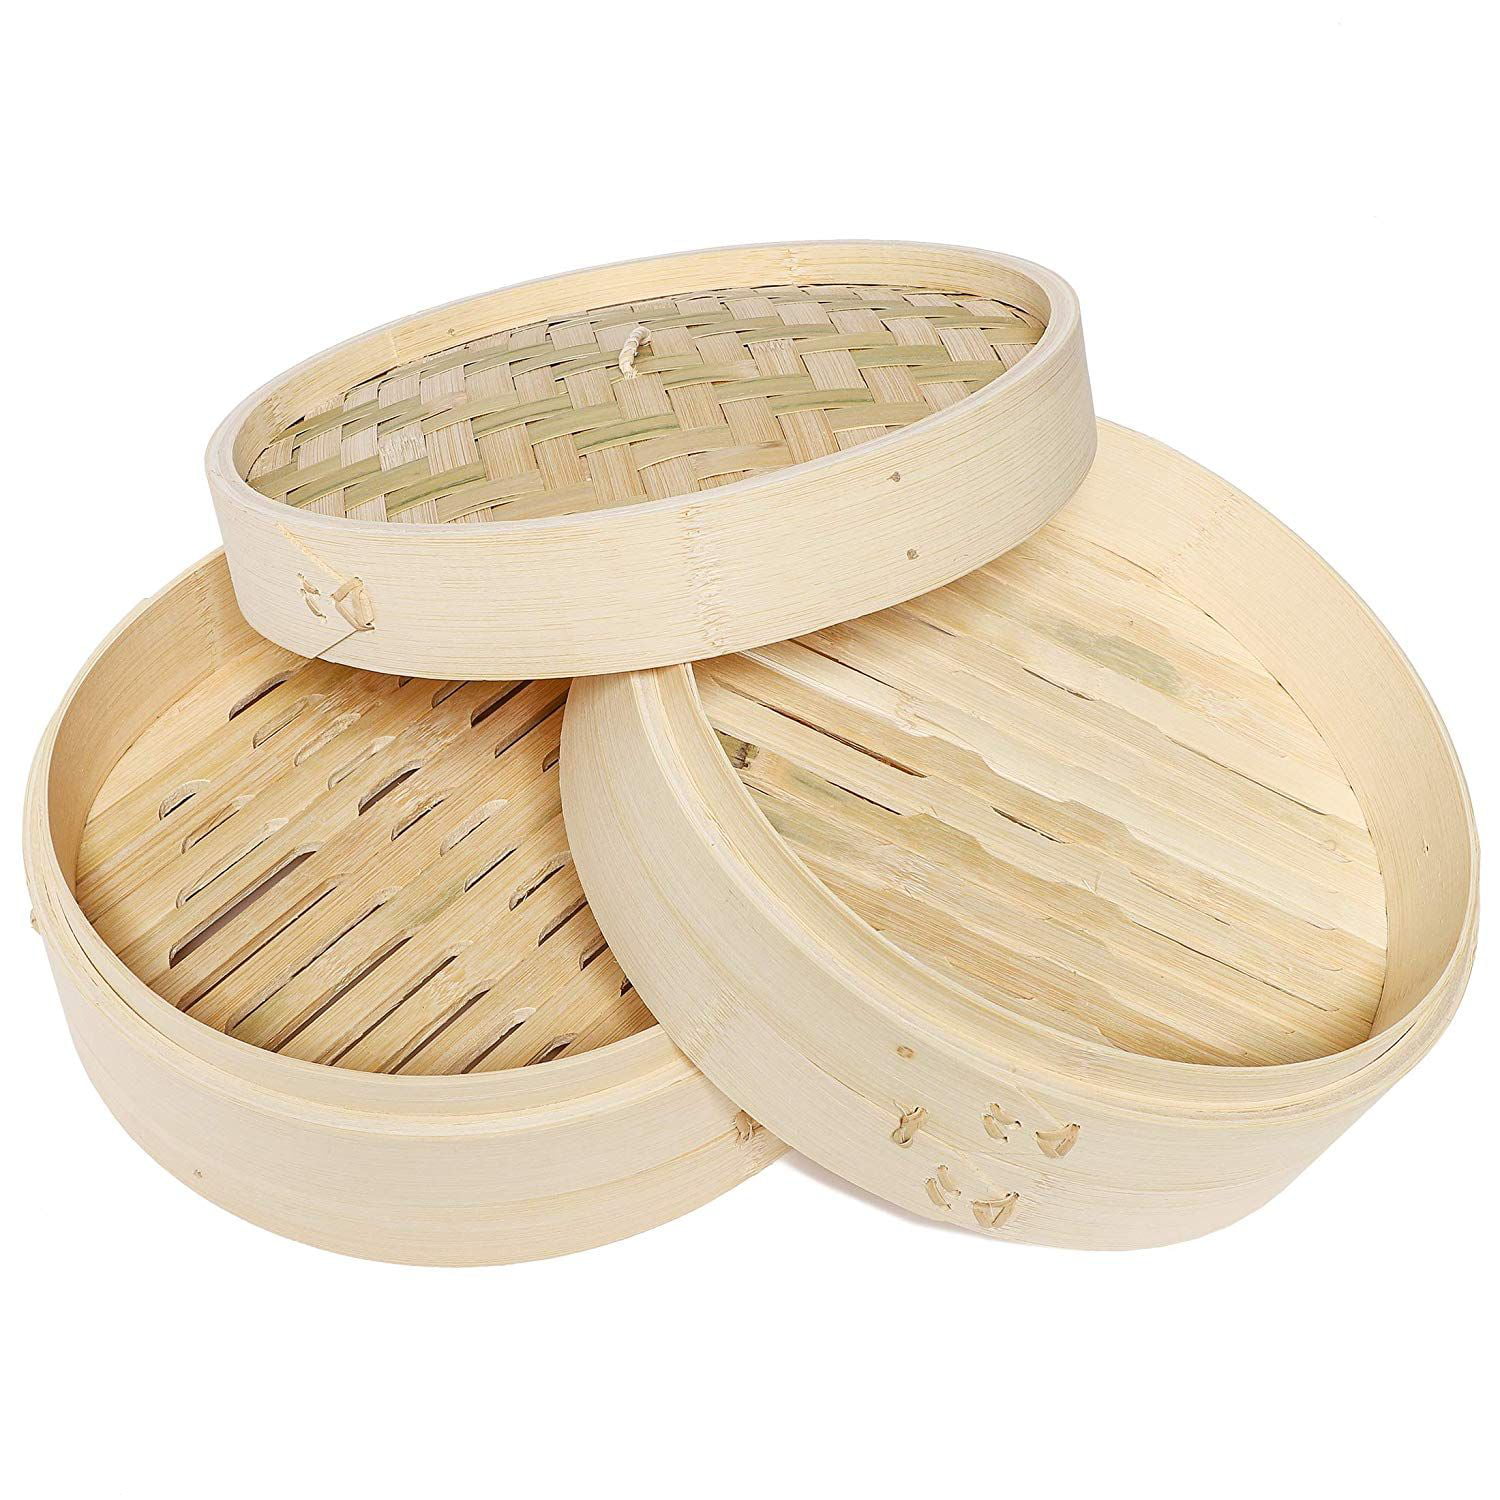 Bamboo Steamer Set 6.5" 3pcs Set With Free Steamer liner paper Traditional